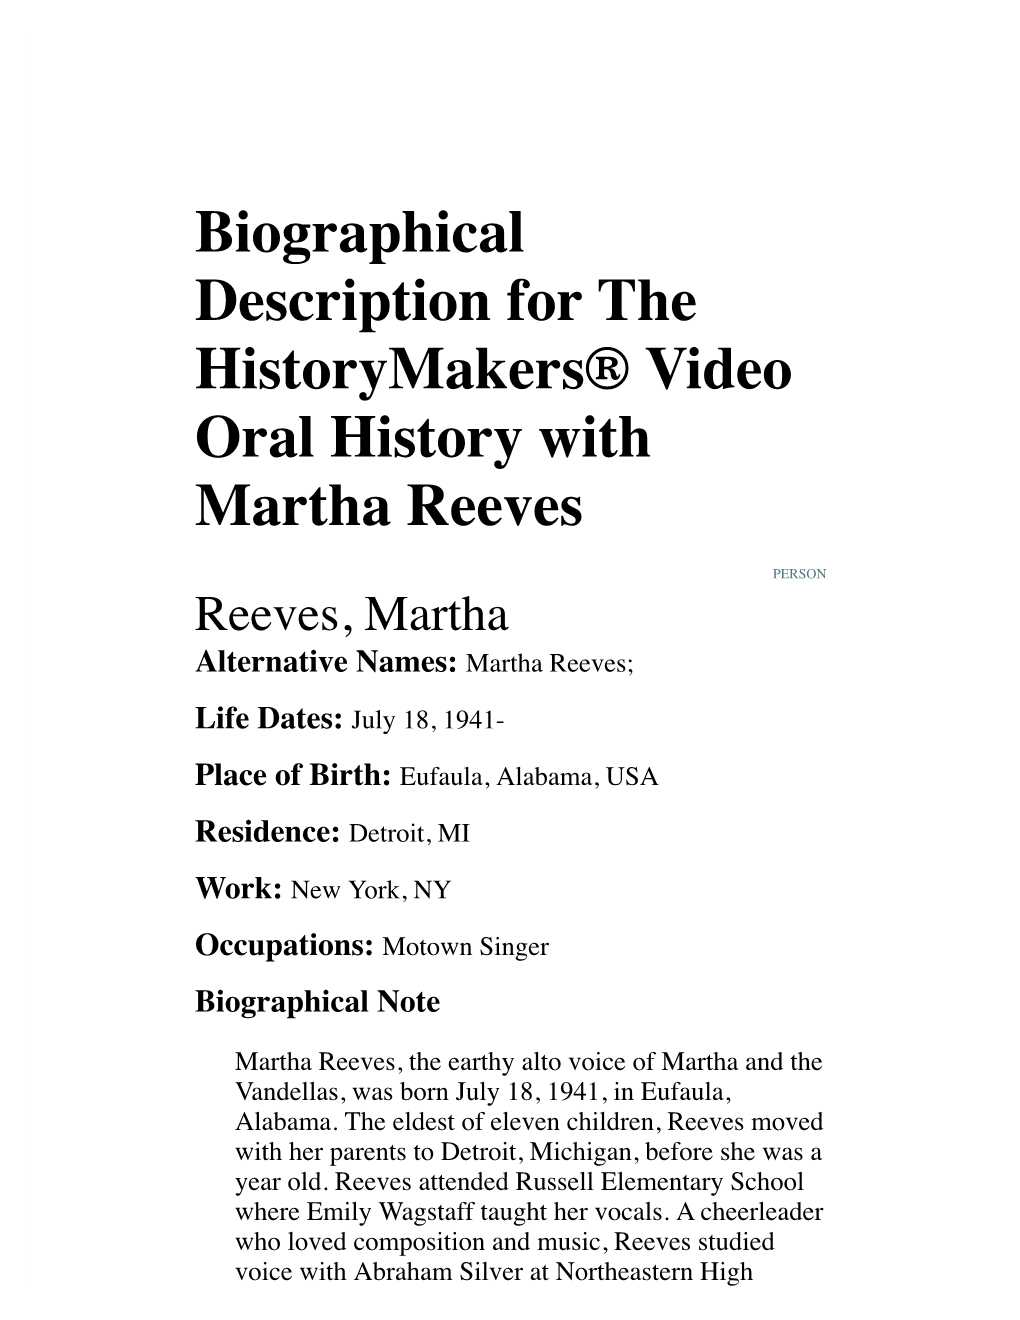 Biographical Description for the Historymakers® Video Oral History with Martha Reeves